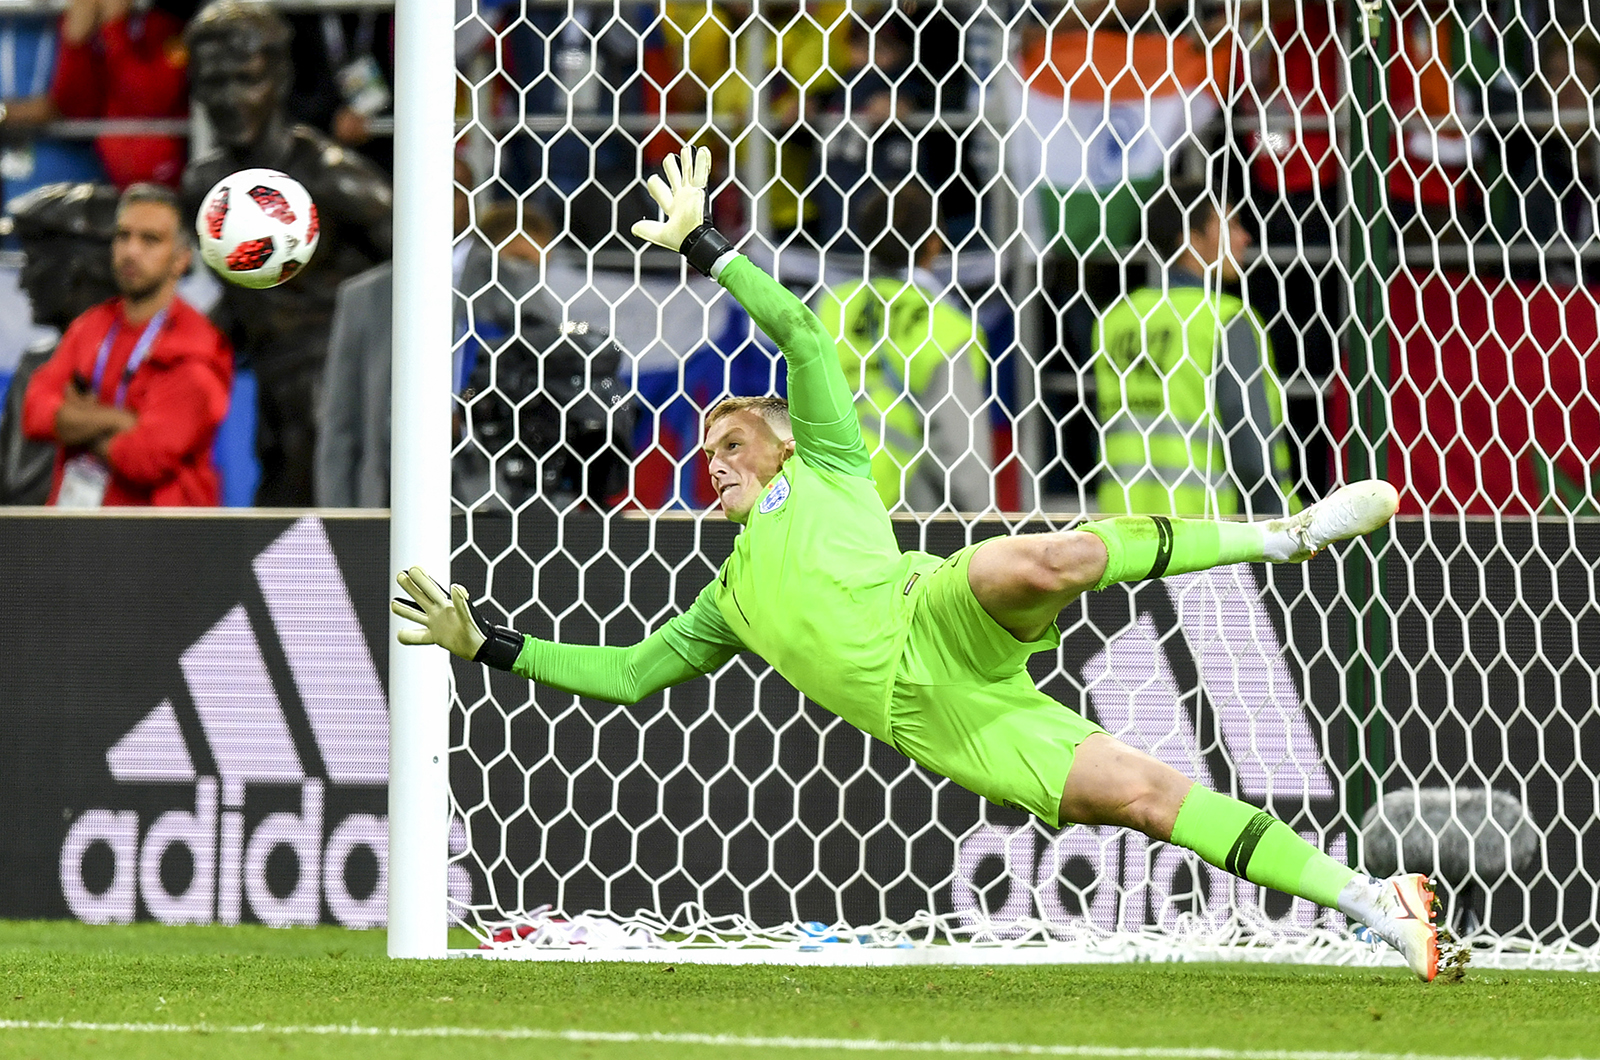 Jordan Pickford Saves Penalty for England at World Cup 2018